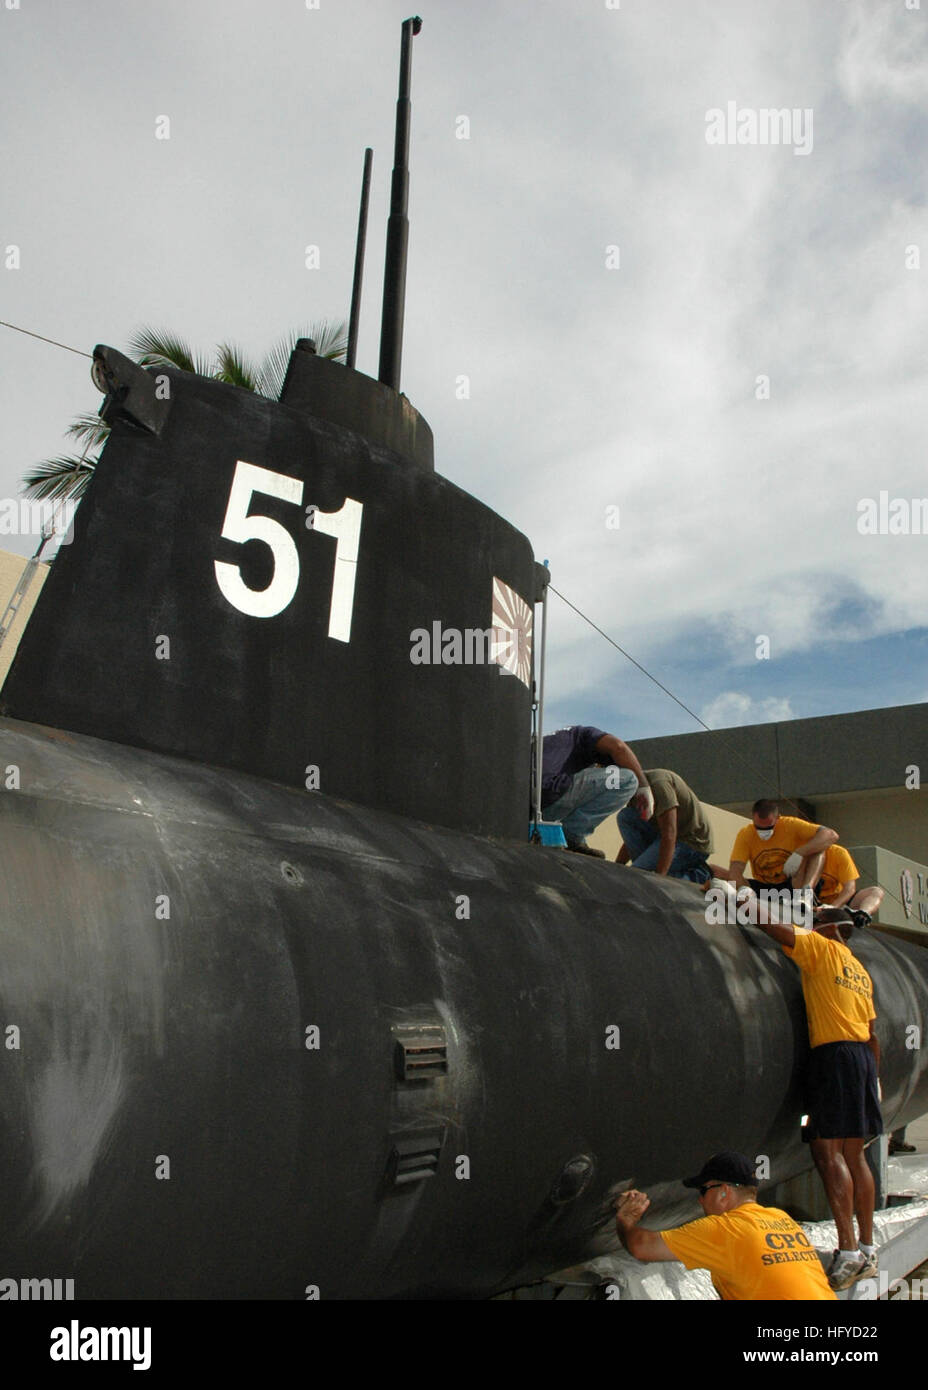 100828-N-5216W-008 SANTA RITA, Guam (Aug. 28, 2010) Chief petty officers and chief petty officer selects from the submarine tender USS Frank Cable (AS 40) perform preservation maintenance on Japanese navy submarine HA-51, a World War II Type C three-man midget submarine, at the T. Snell Newman Visitor Center. Cable is undergoing upgrades at Guam Shipyard for a conversion to the Military Sealift Command. (U.S. Navy photo by Chief Mass Communication Specialist Jennifer L. Walker/Released) US Navy 100828-N-5216W-008 Chief petty officers and chief petty officer selects from the submarine tender US Stock Photo